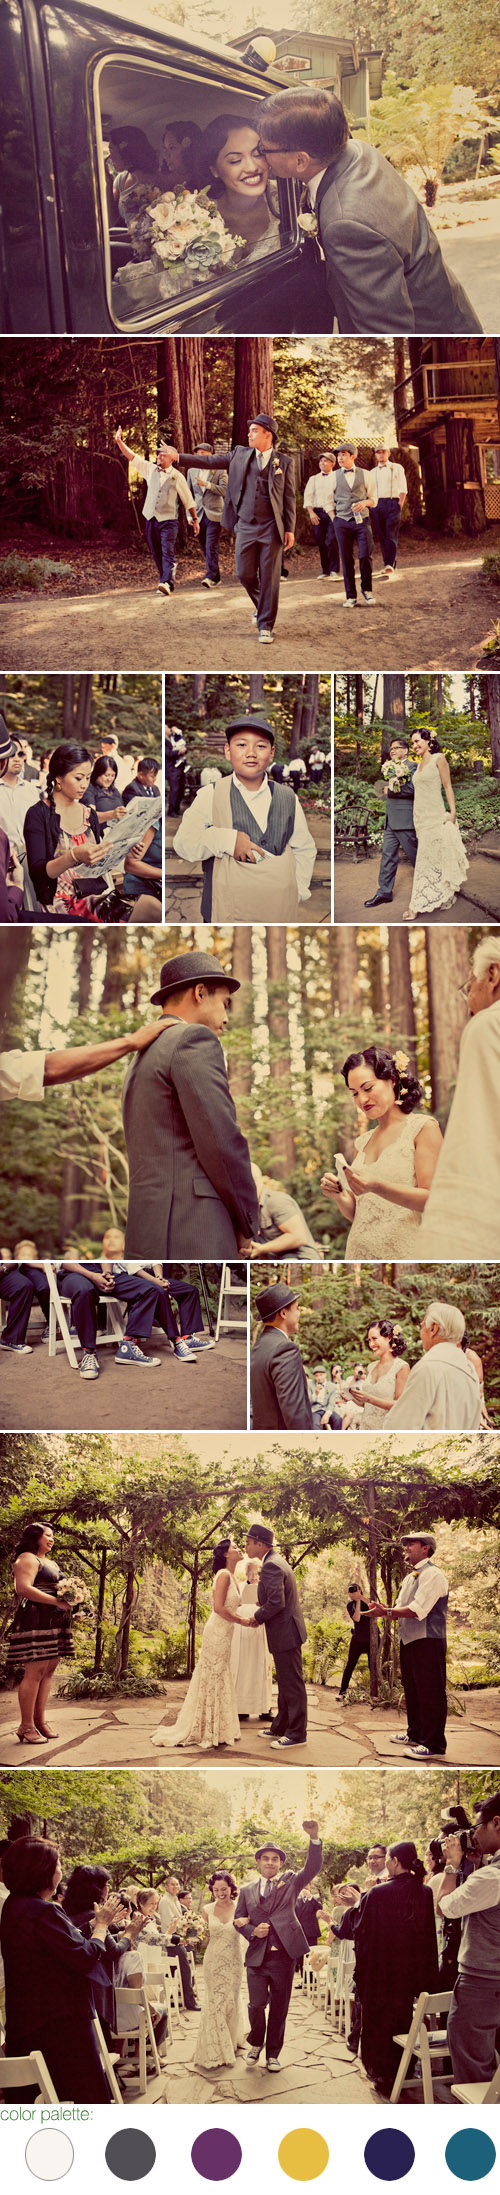 picnic inspired real wedding at Nestldown in the Santa Cruz Mountains, photos by Paco and Betty